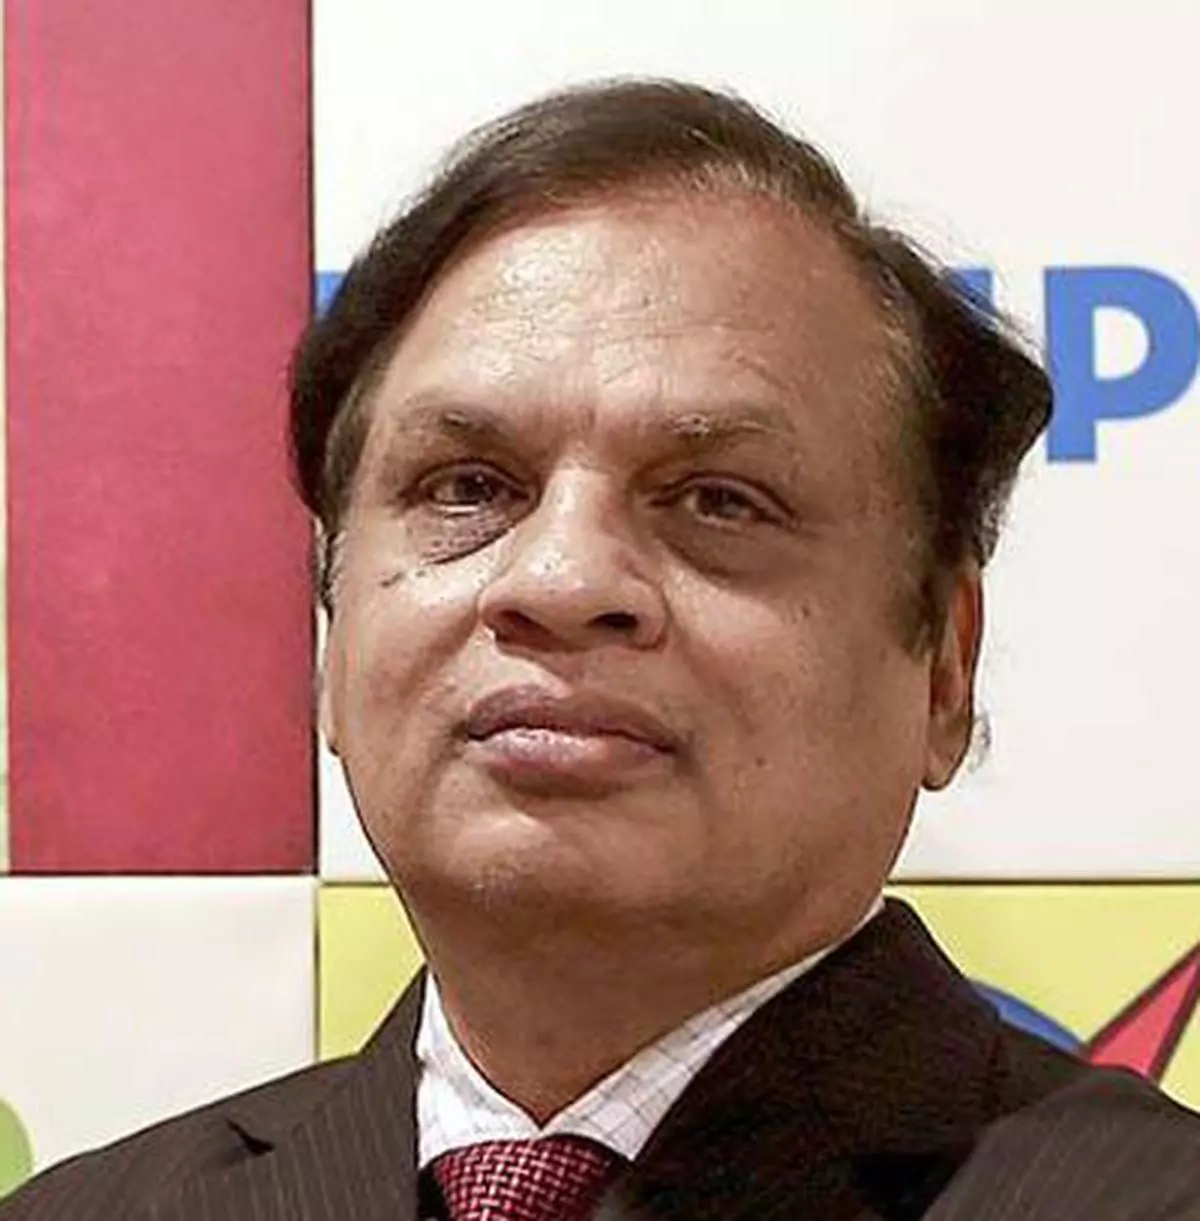 File photo of Videocon group founder Venugopal Dhoot